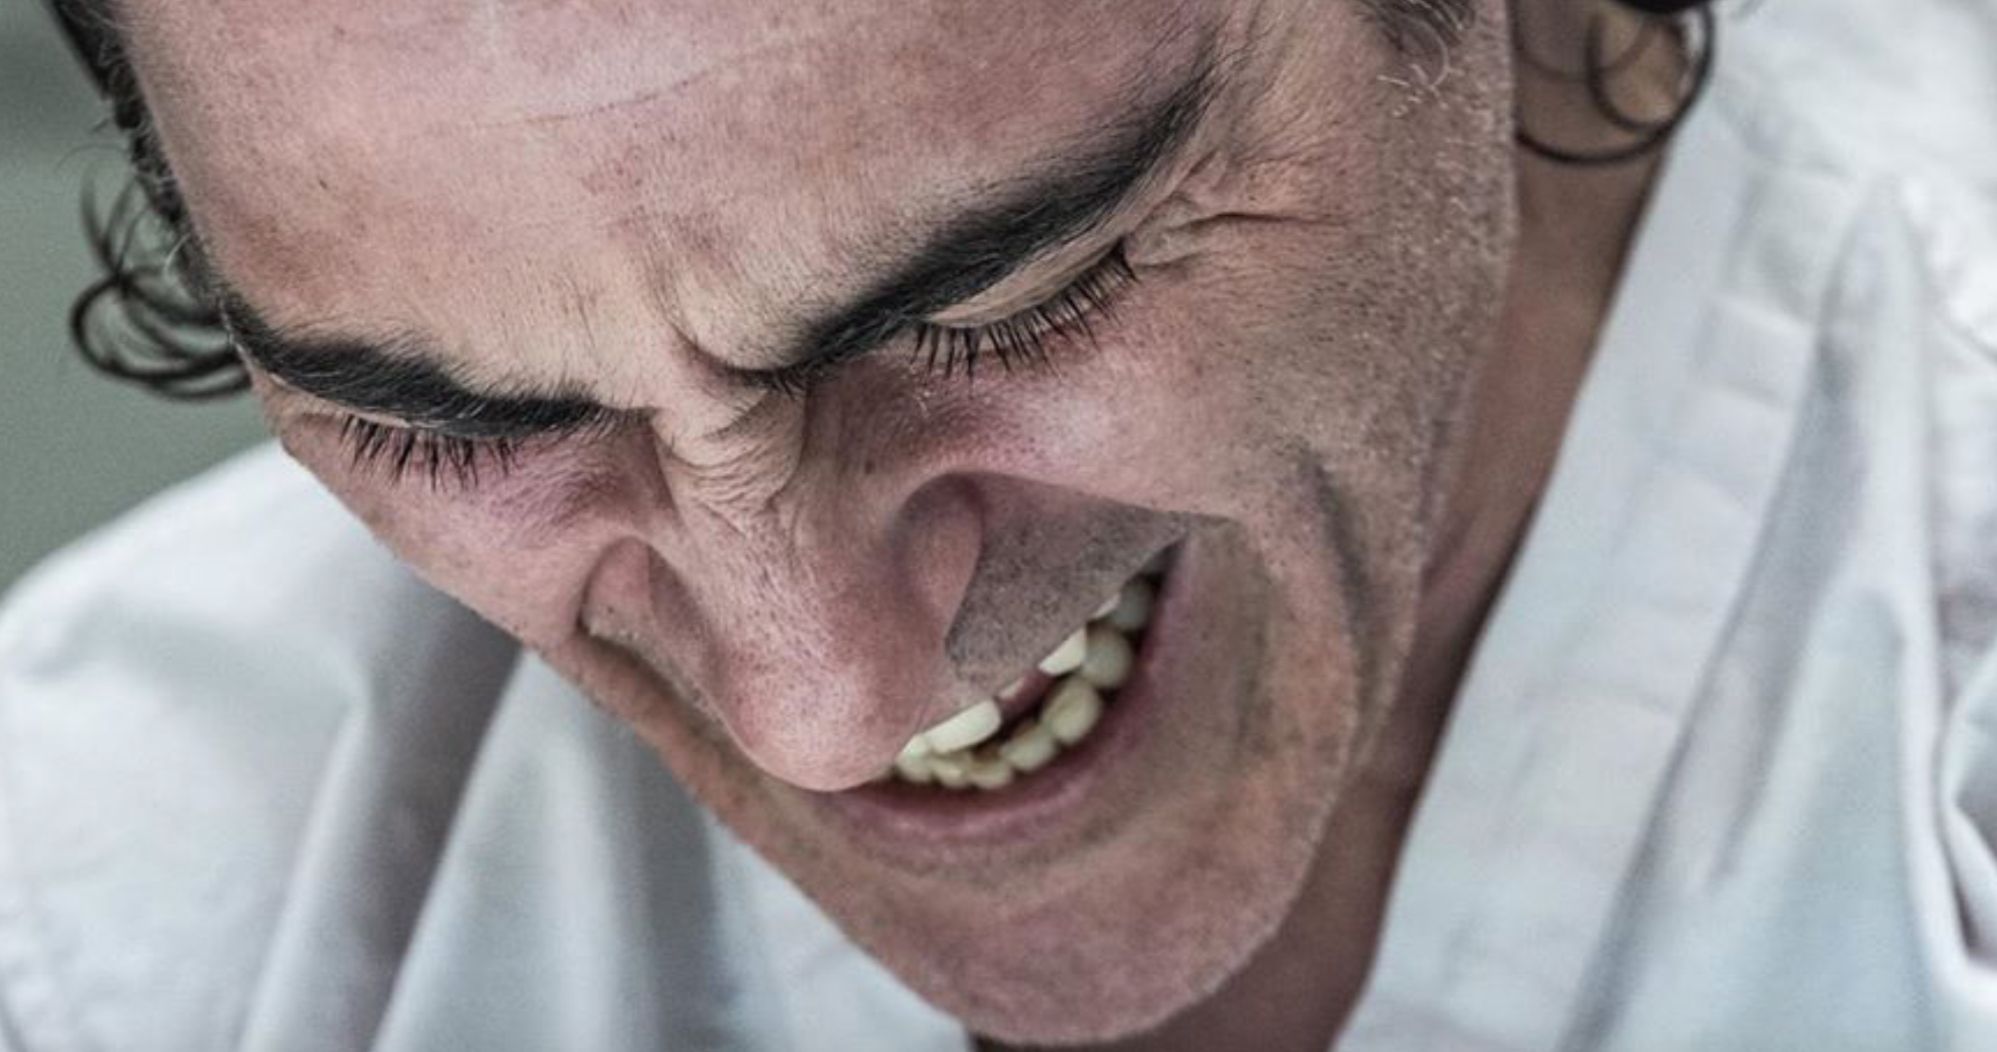 Joker Director Shares Never-Before-Seen Joaquin Phoenix Images from Final Day of Shooting